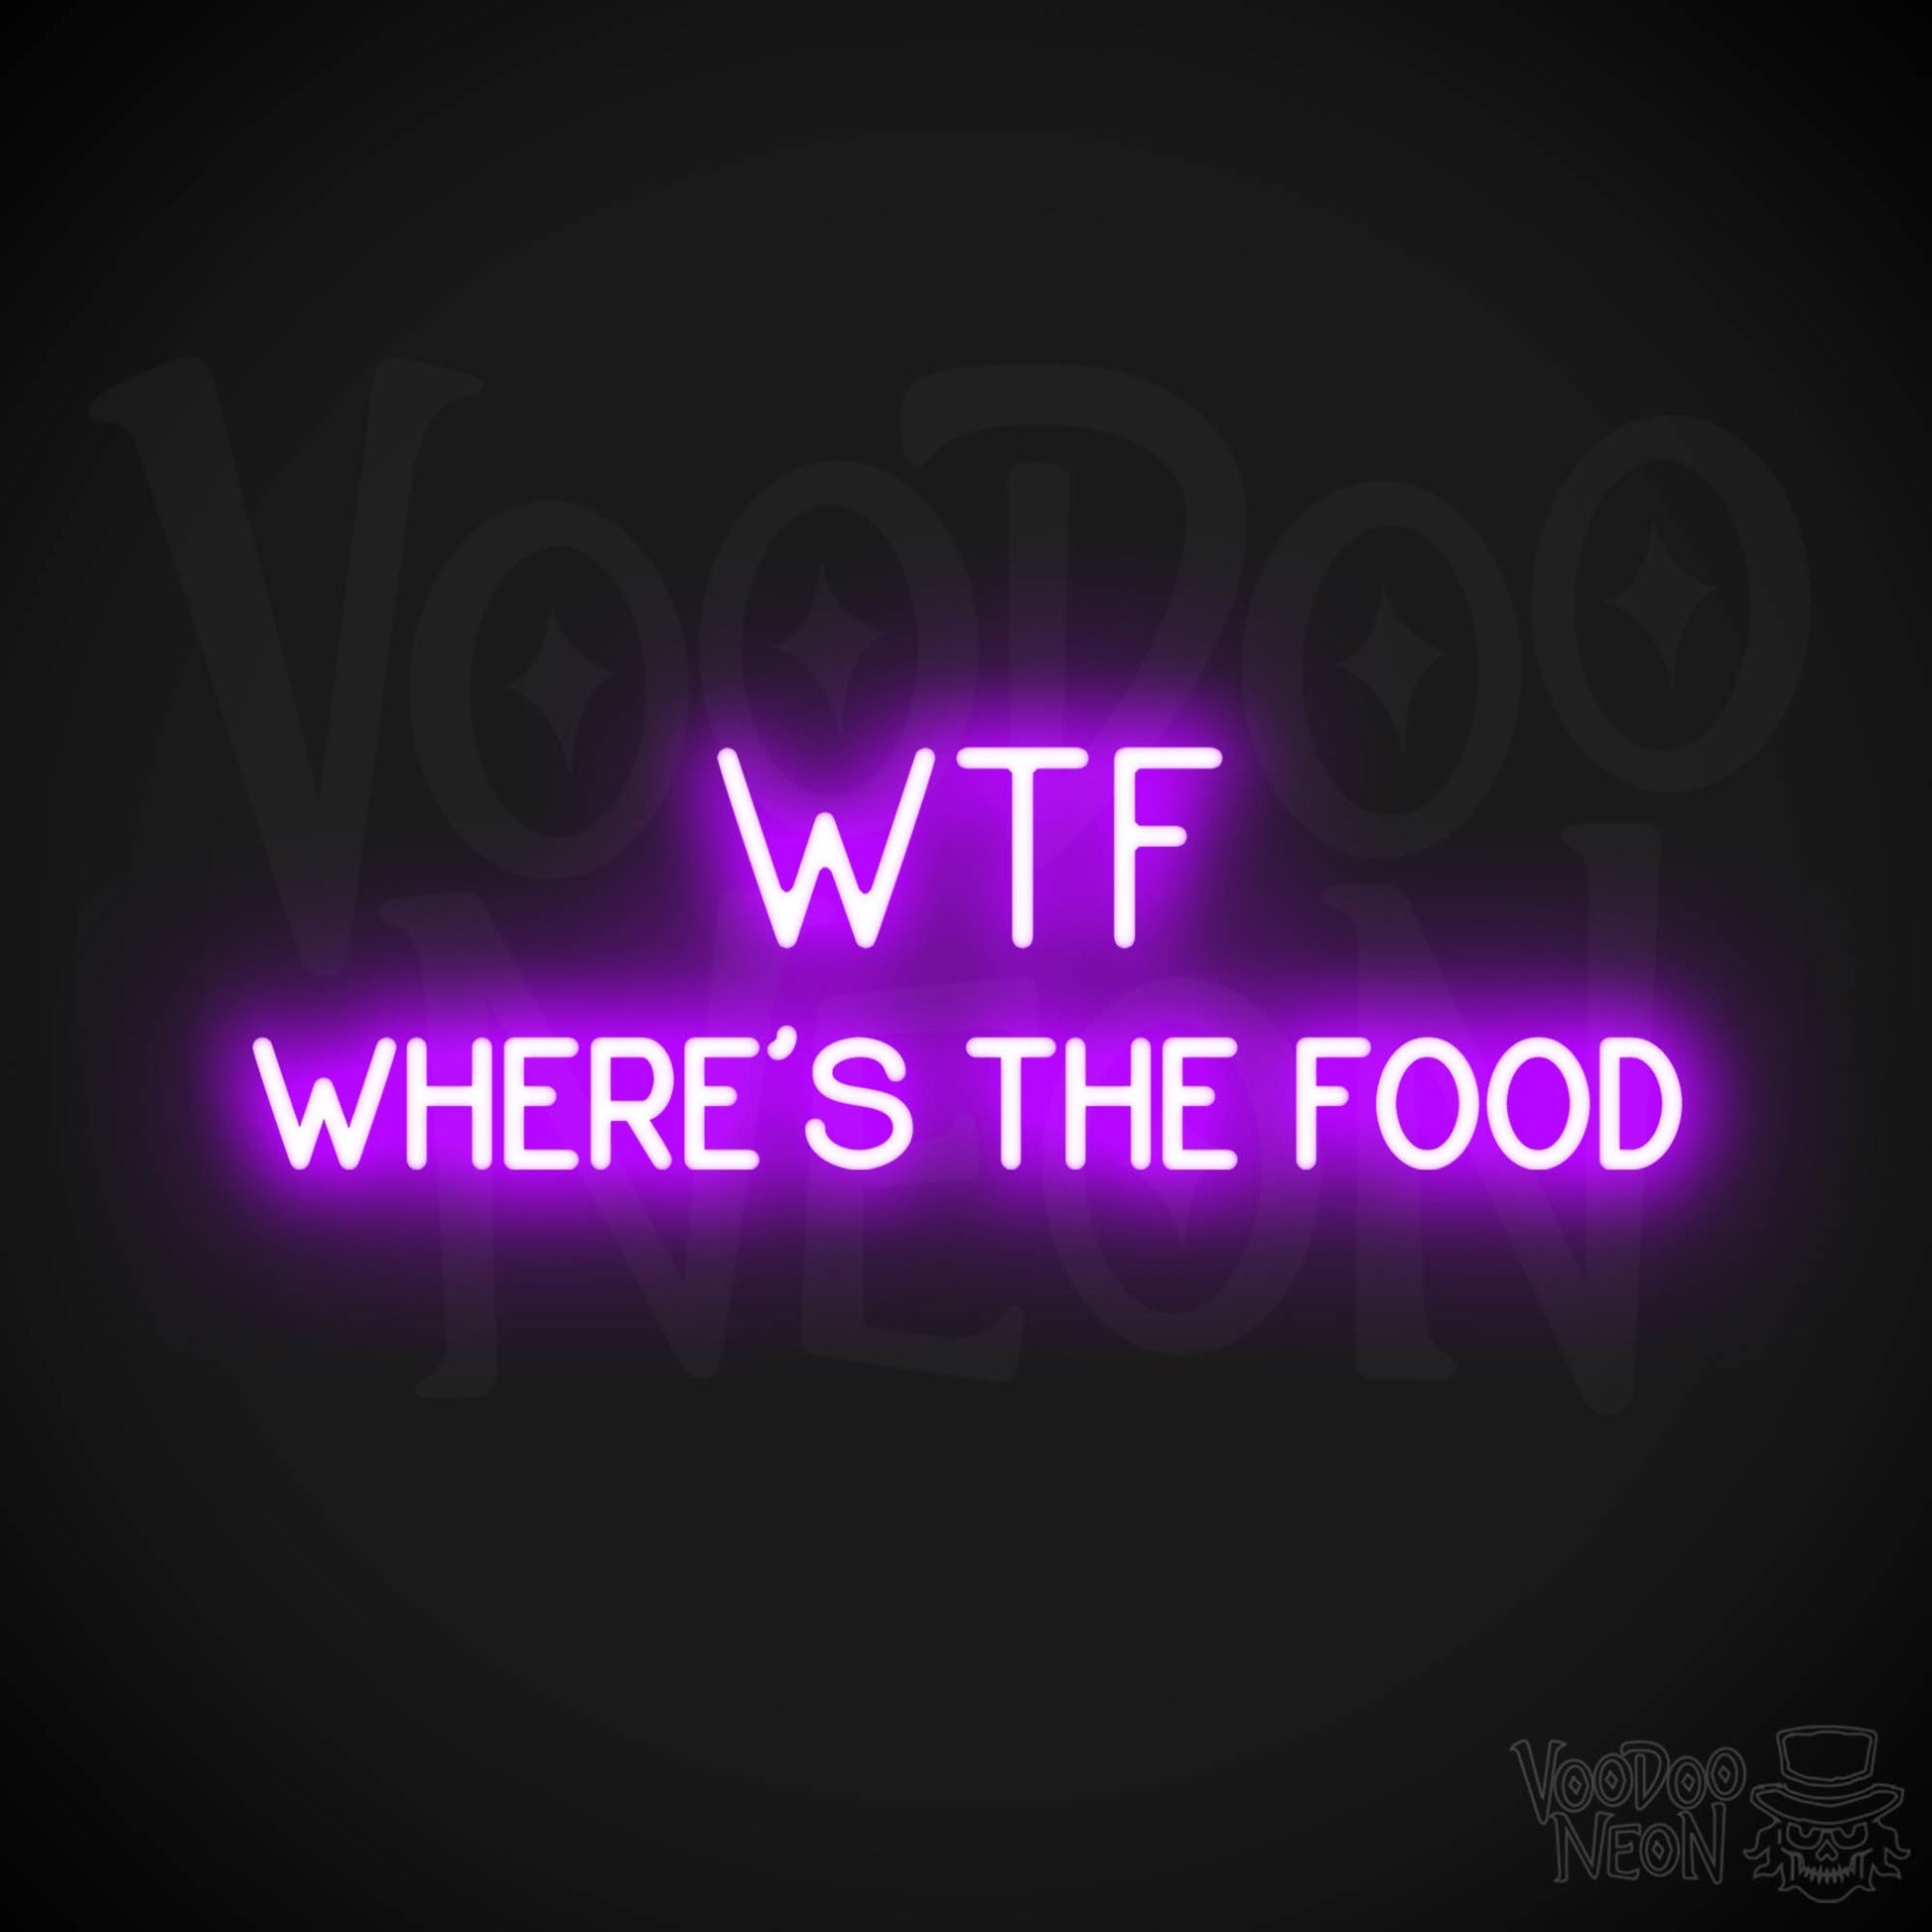 Wtf (Wheres The Food) LED Neon - Purple